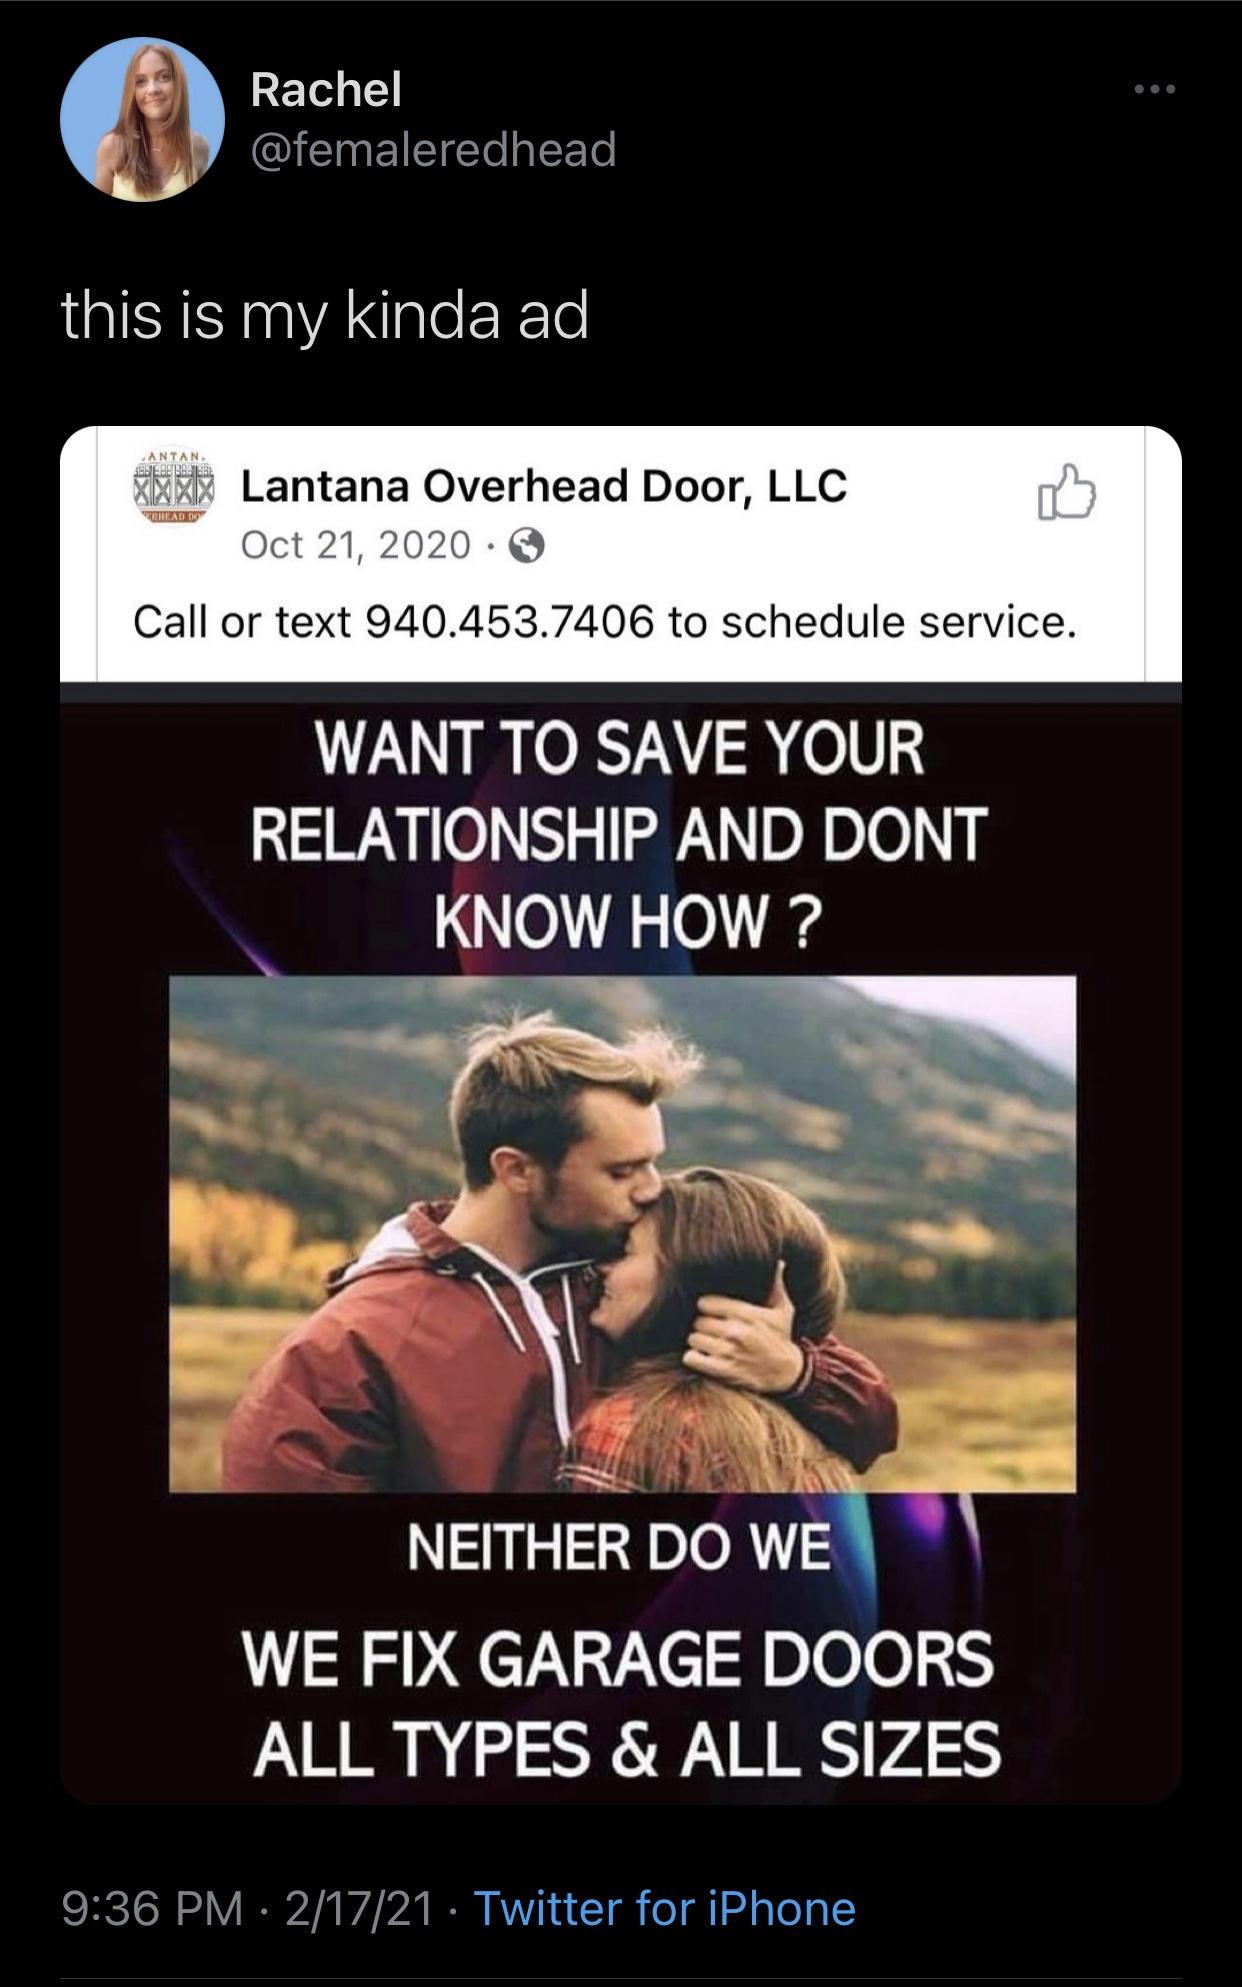 photo caption - Rachel this is my kinda ad Antan six to Lantana Overhead Door, Llc Erhead Dot Call or text 940.453.7406 to schedule service. Want To Save Your Relationship And Dont Know How? Neither Do We We Fix Garage Doors All Types & All Sizes 21721 Tw